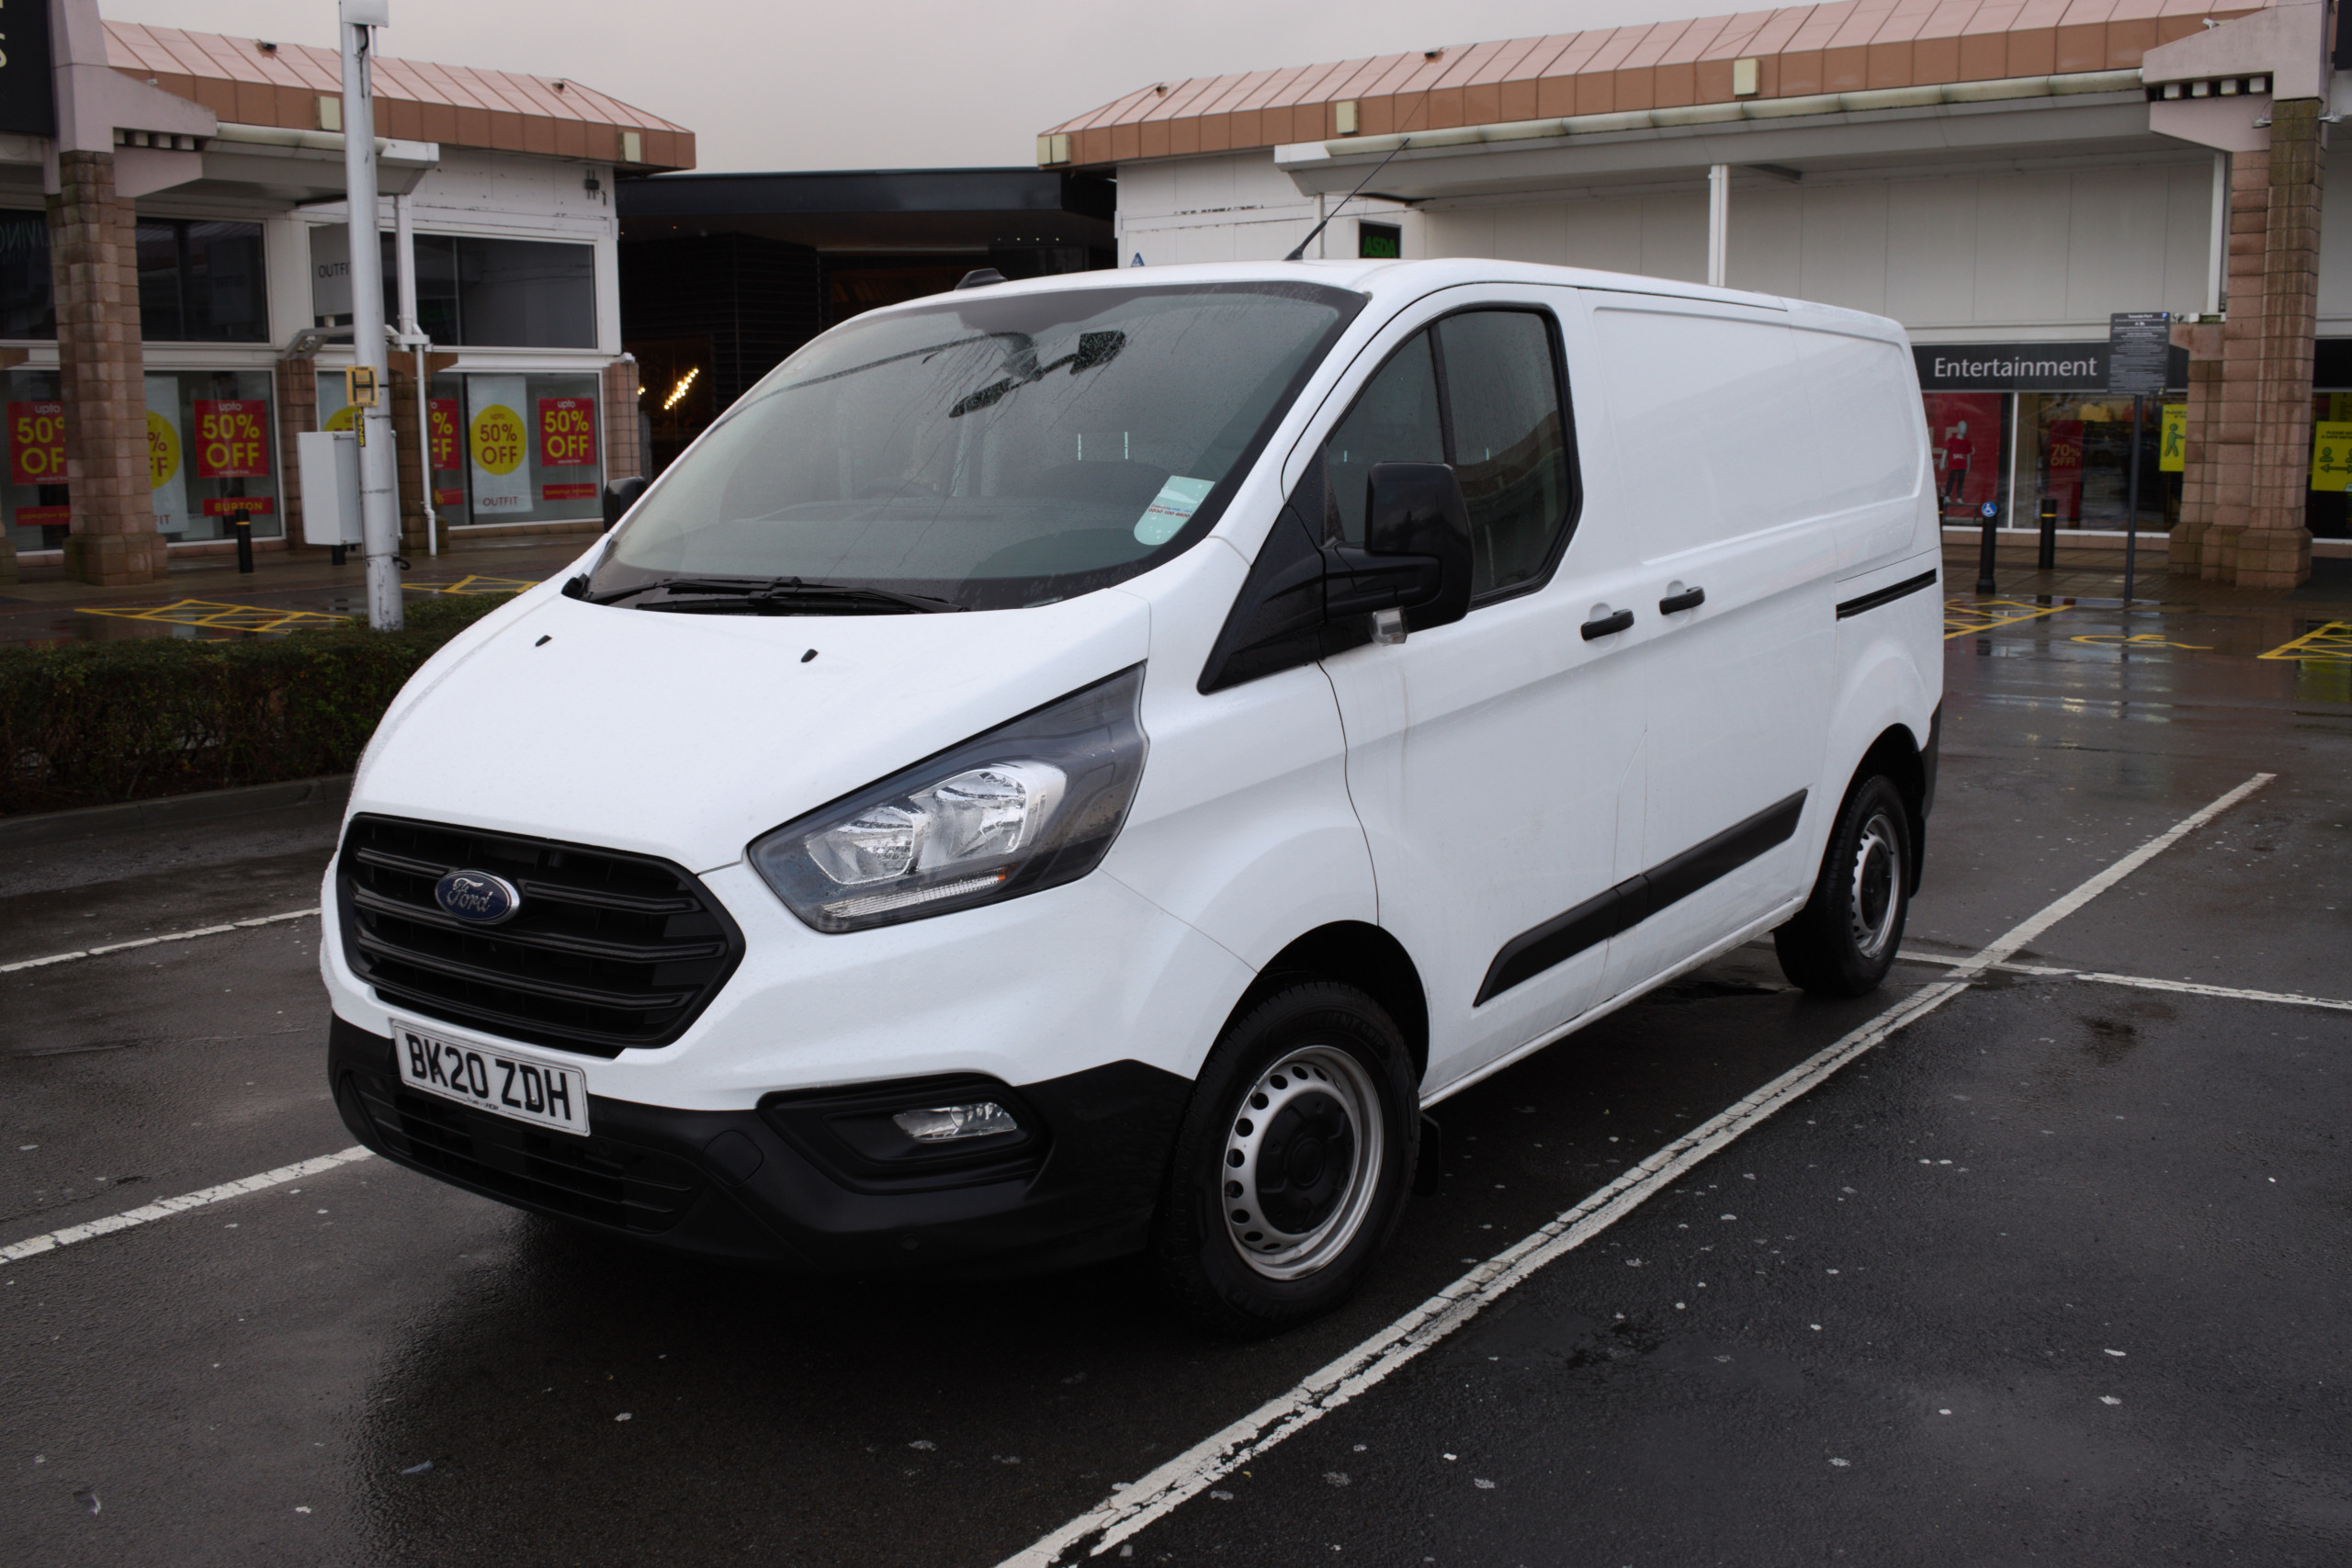 The Ford Transit Custom lives up to its reputation